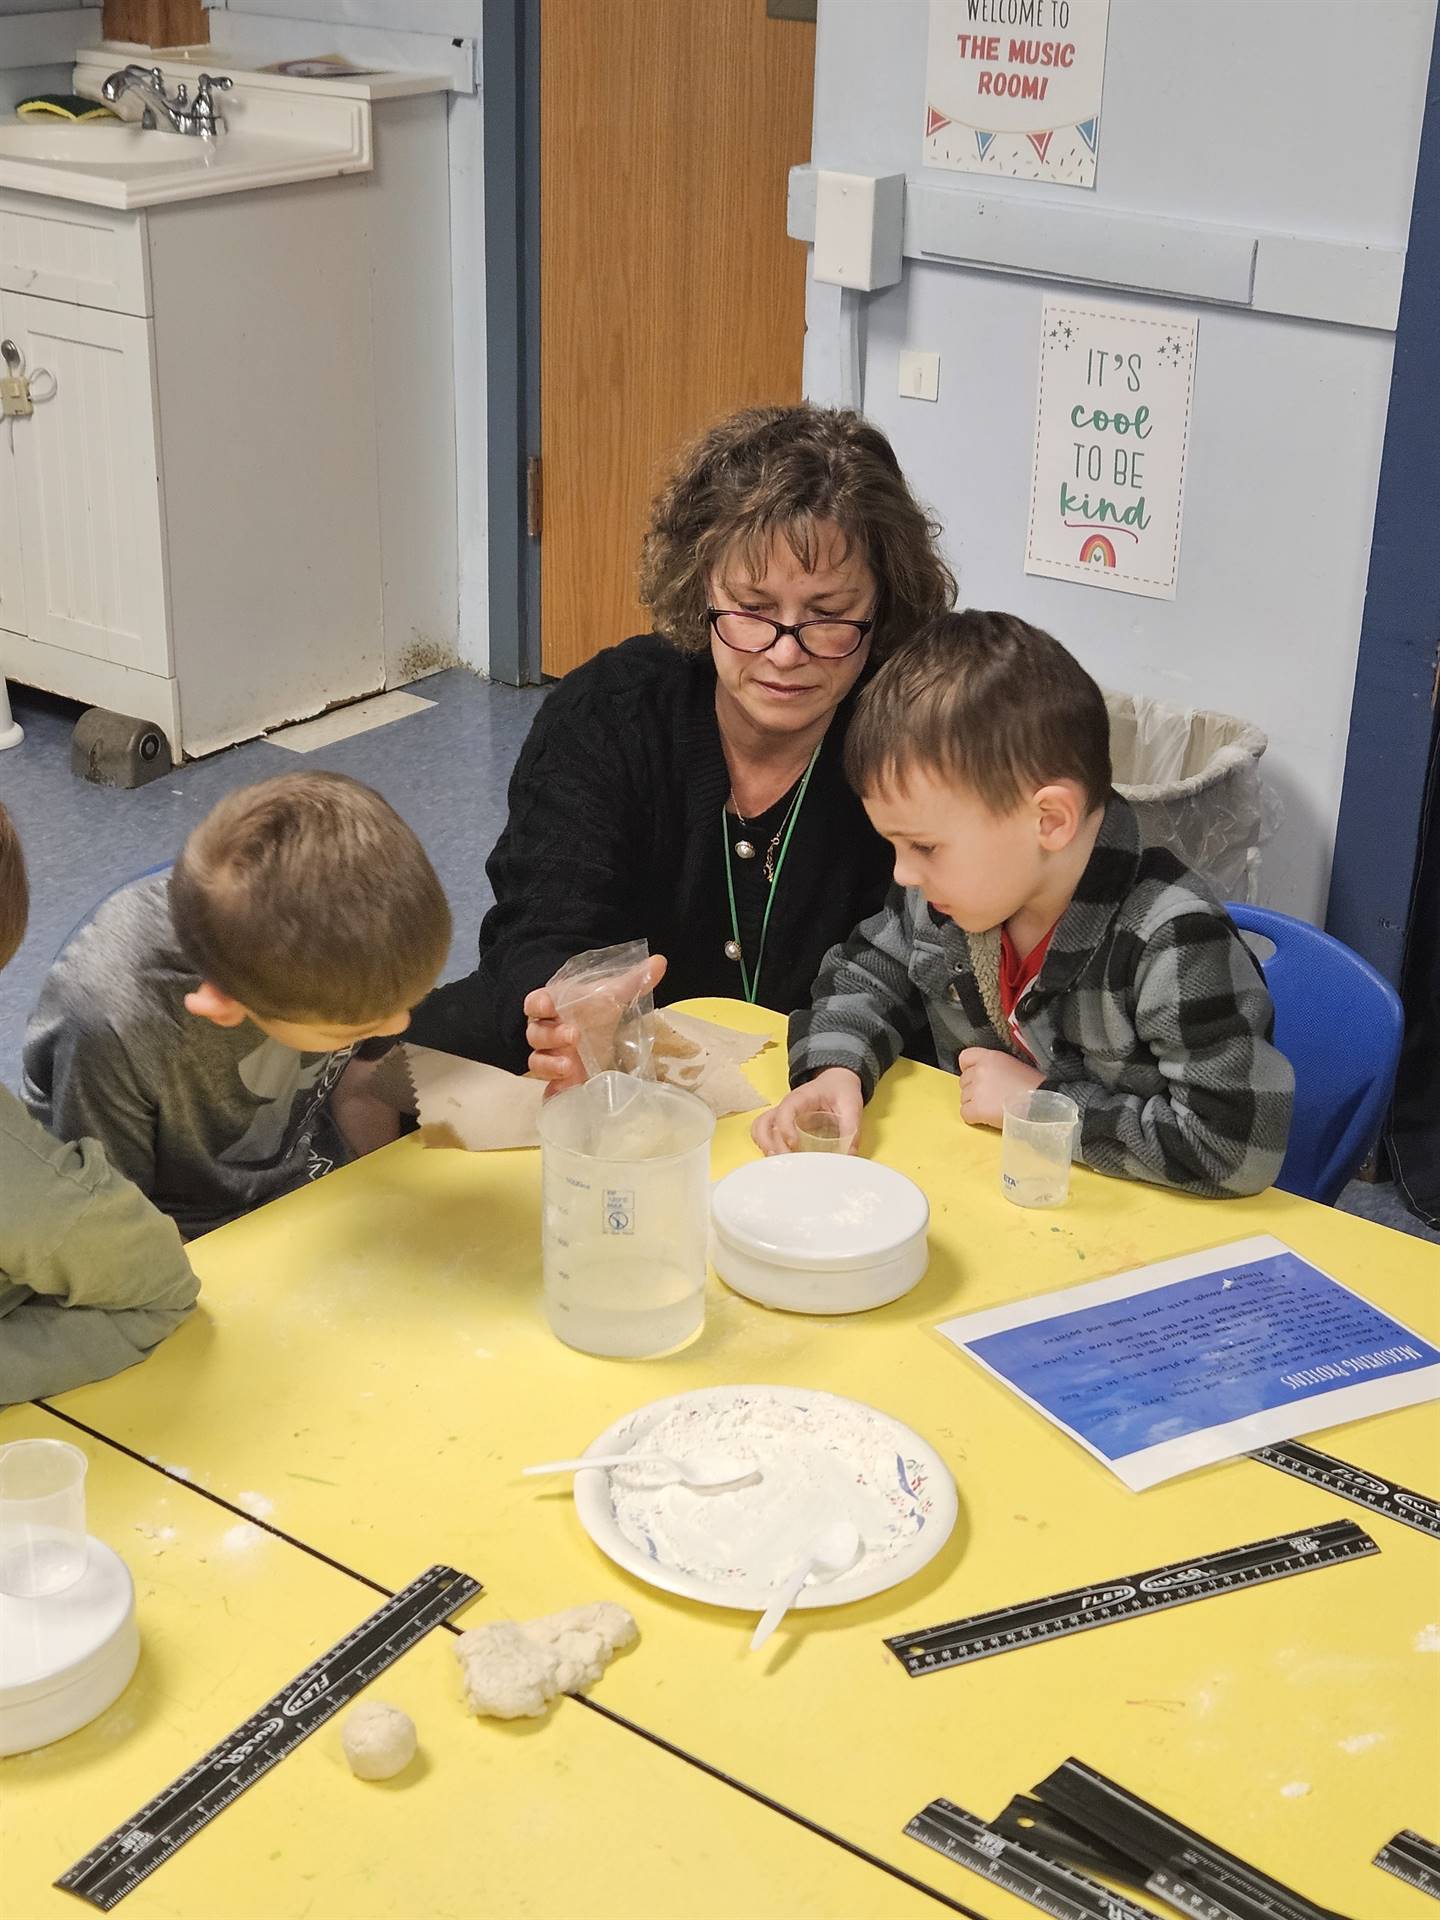 an adult works with student mixing flour and water